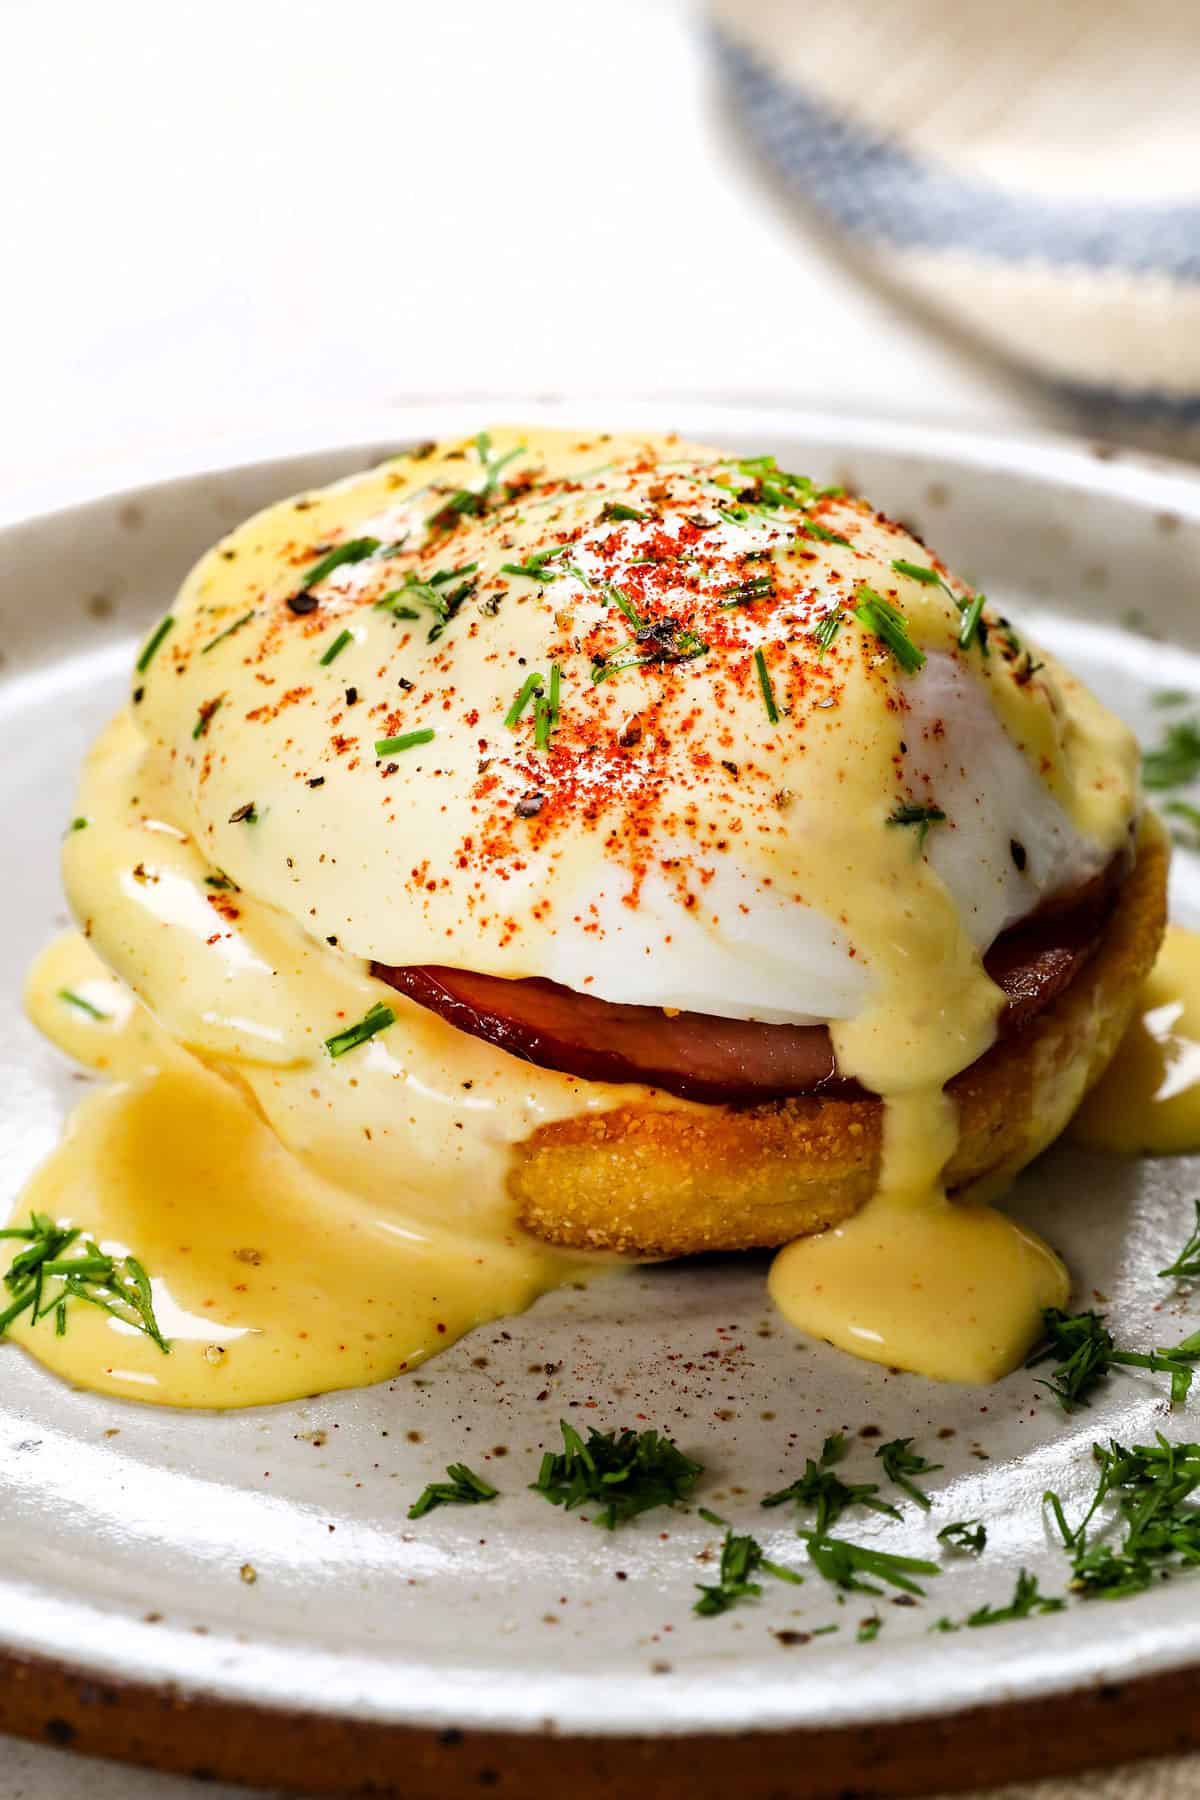 showing how to make Eggs Benedict recipe by assembling with English Muffin, Canadian Bacon, poached egg and hollandaise sauce